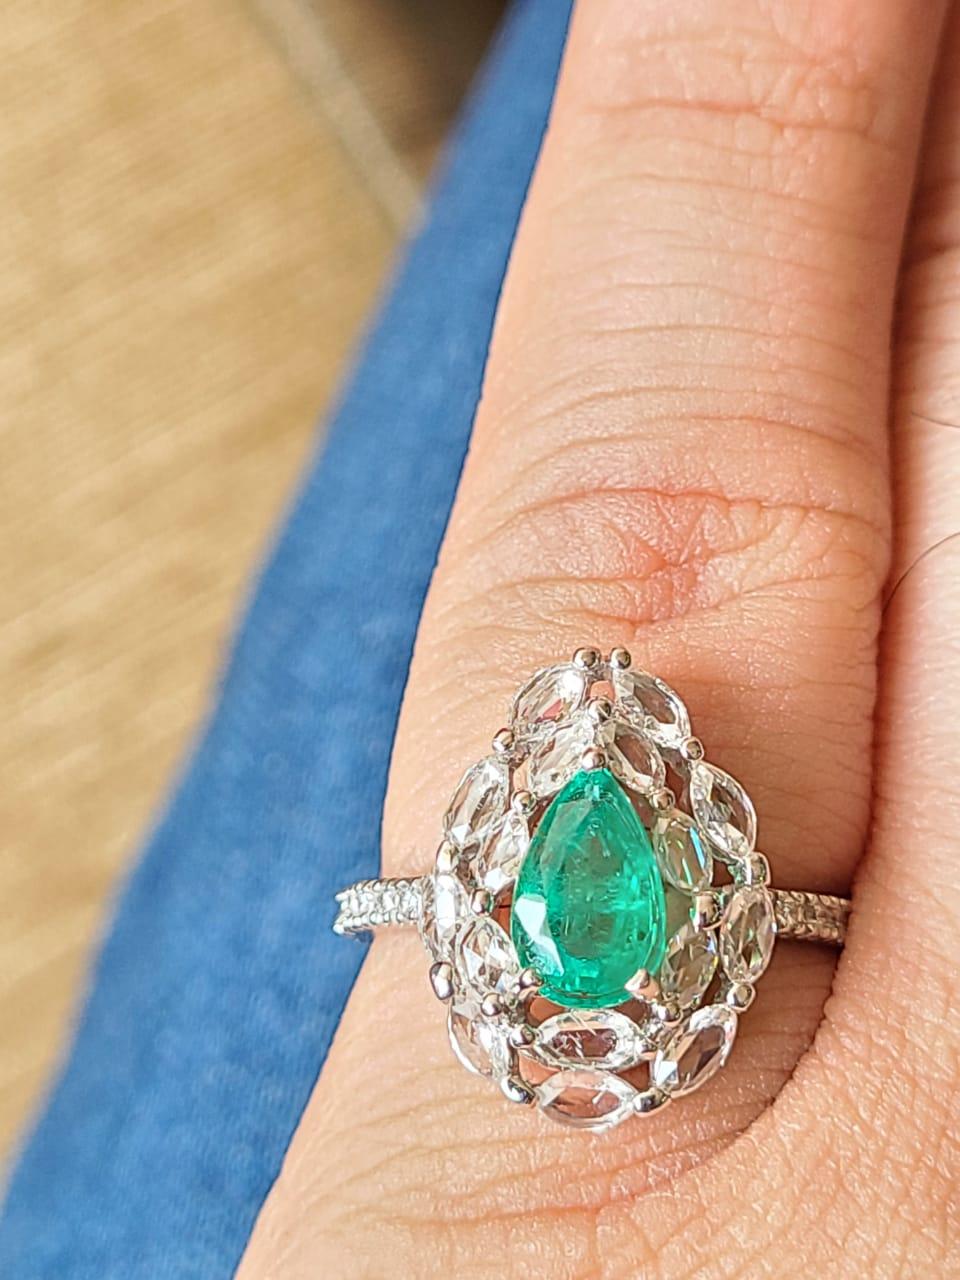 A very gorgeous and wearable Emerald Engagement Ring set in 18K White Gold & Diamonds. The weight of the Pear shaped Emerald is 1.01 carats. The Emerald is of Zambian origin and is completely natural without any treatment.  The weight of the Rose